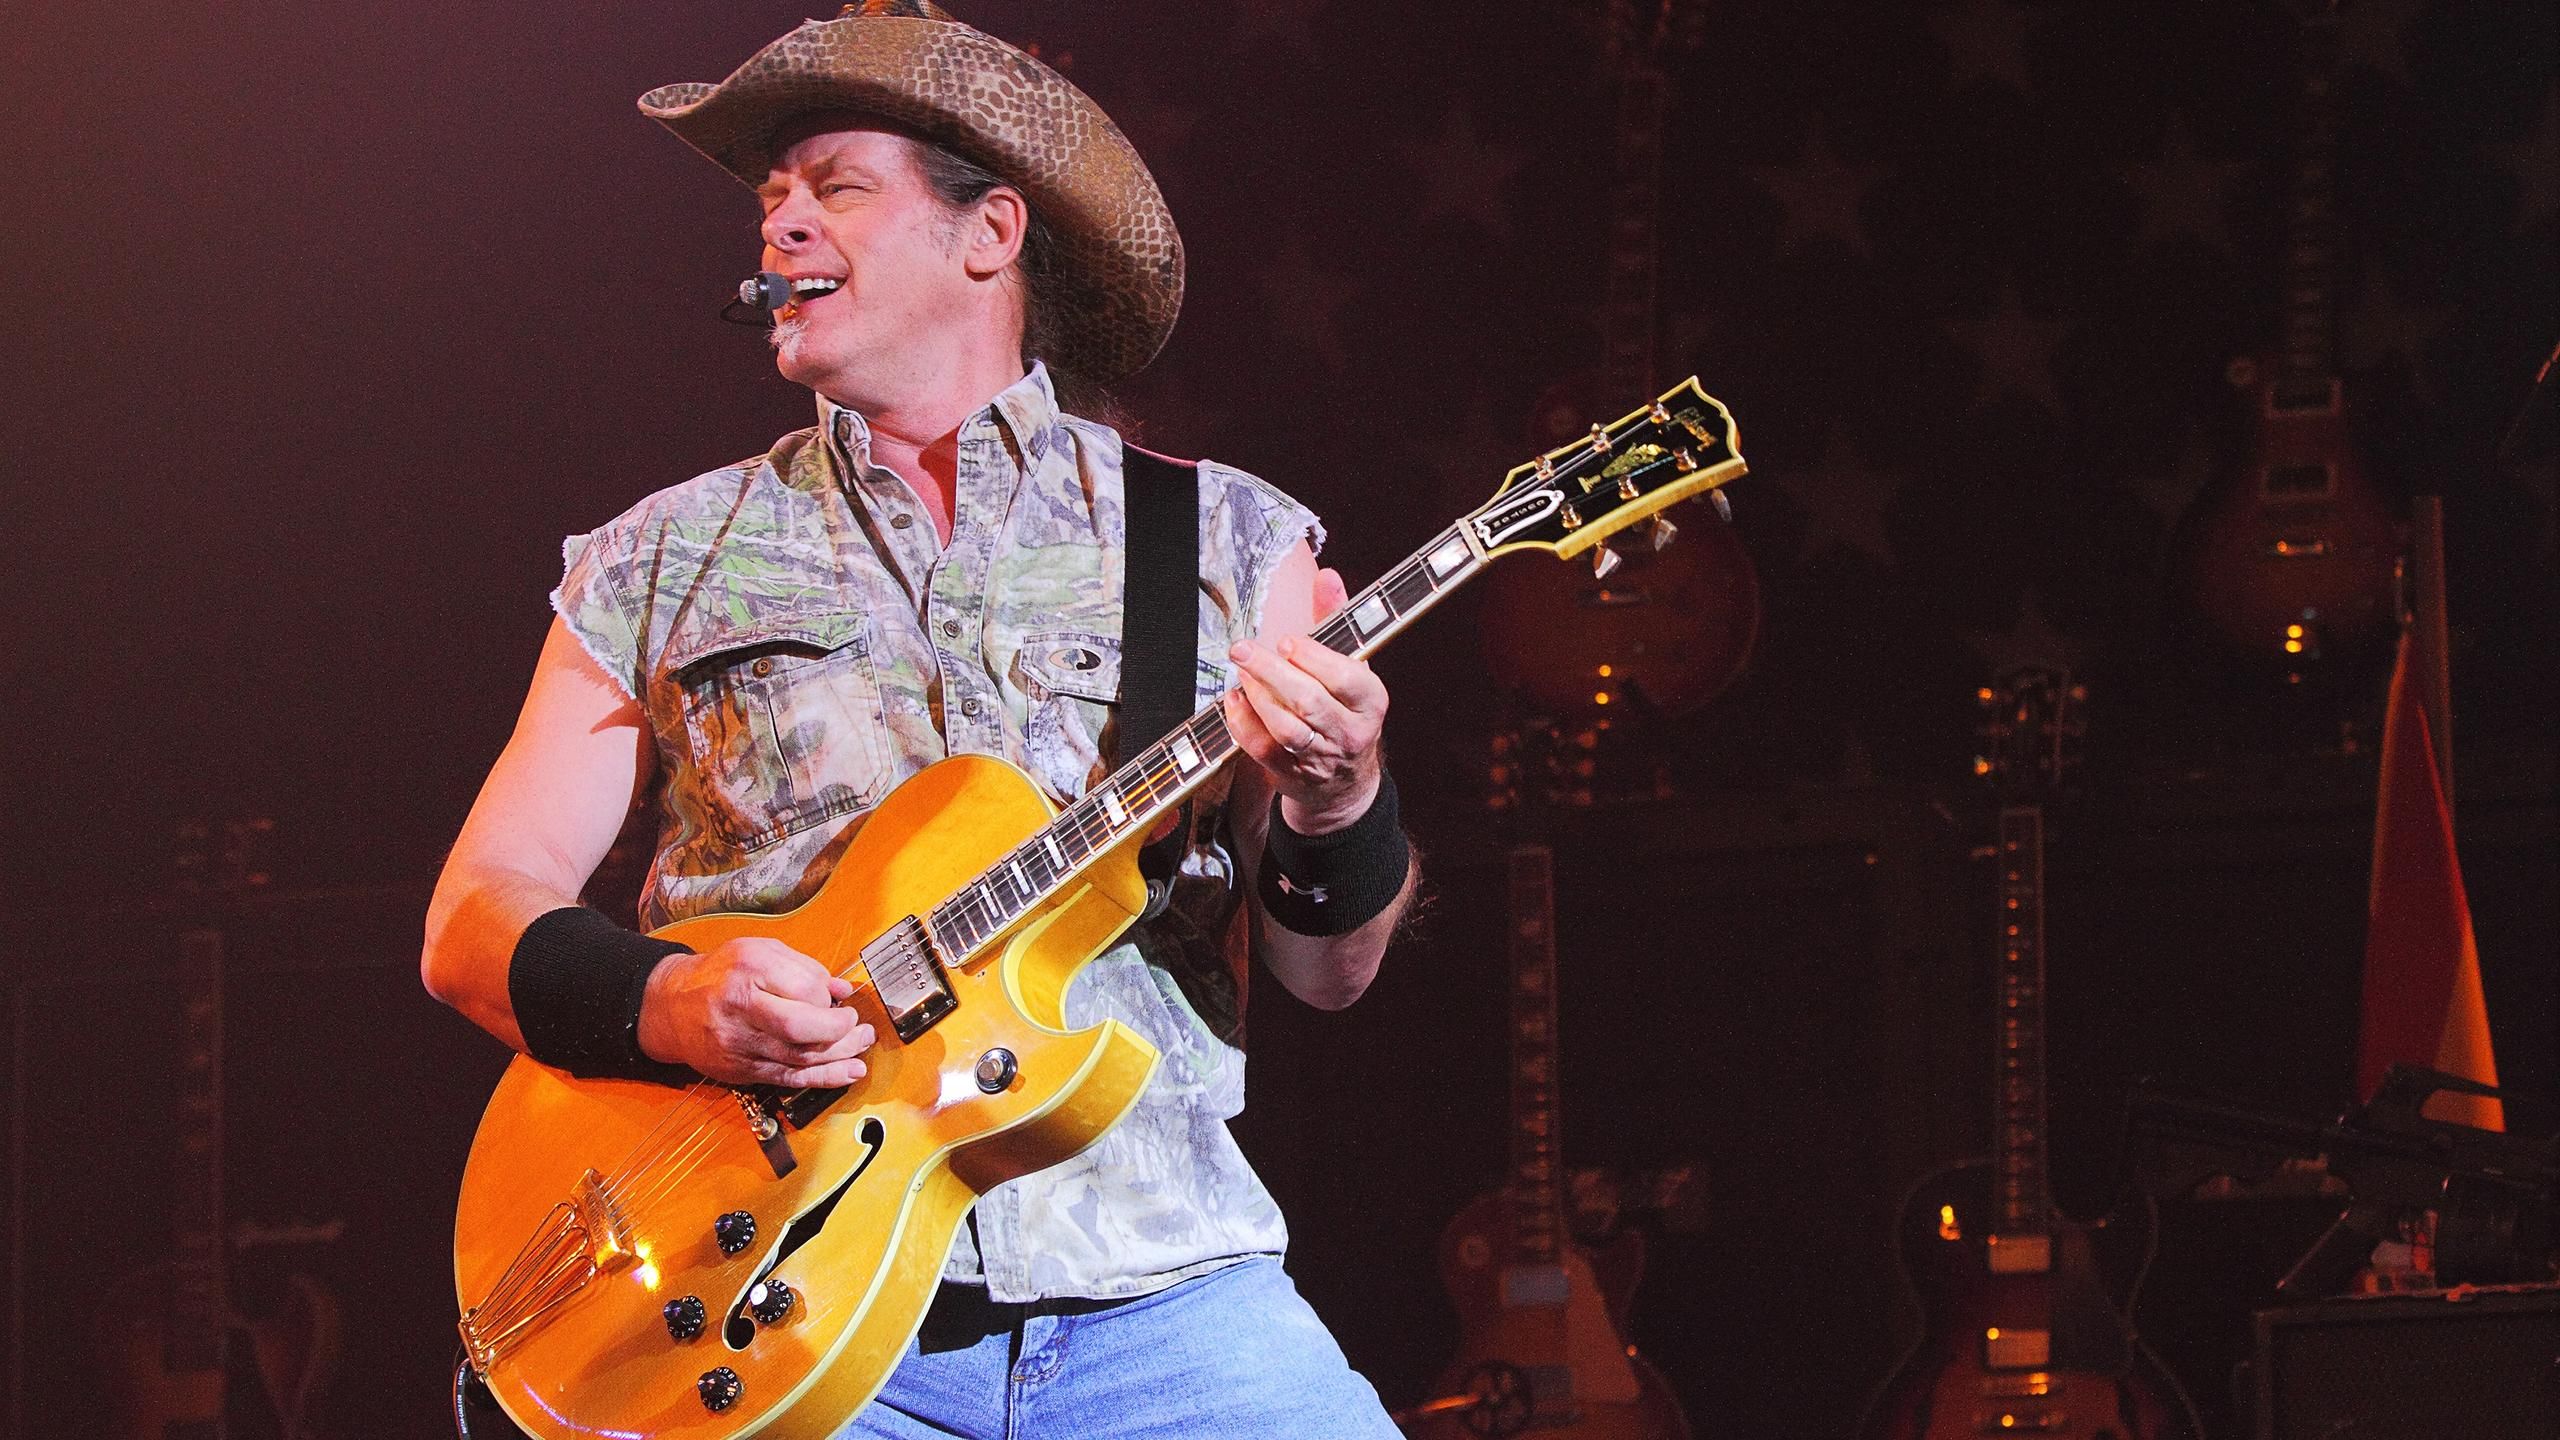 Ted Nugent tour dates 2020 2021. Ted Nugent tickets and concerts